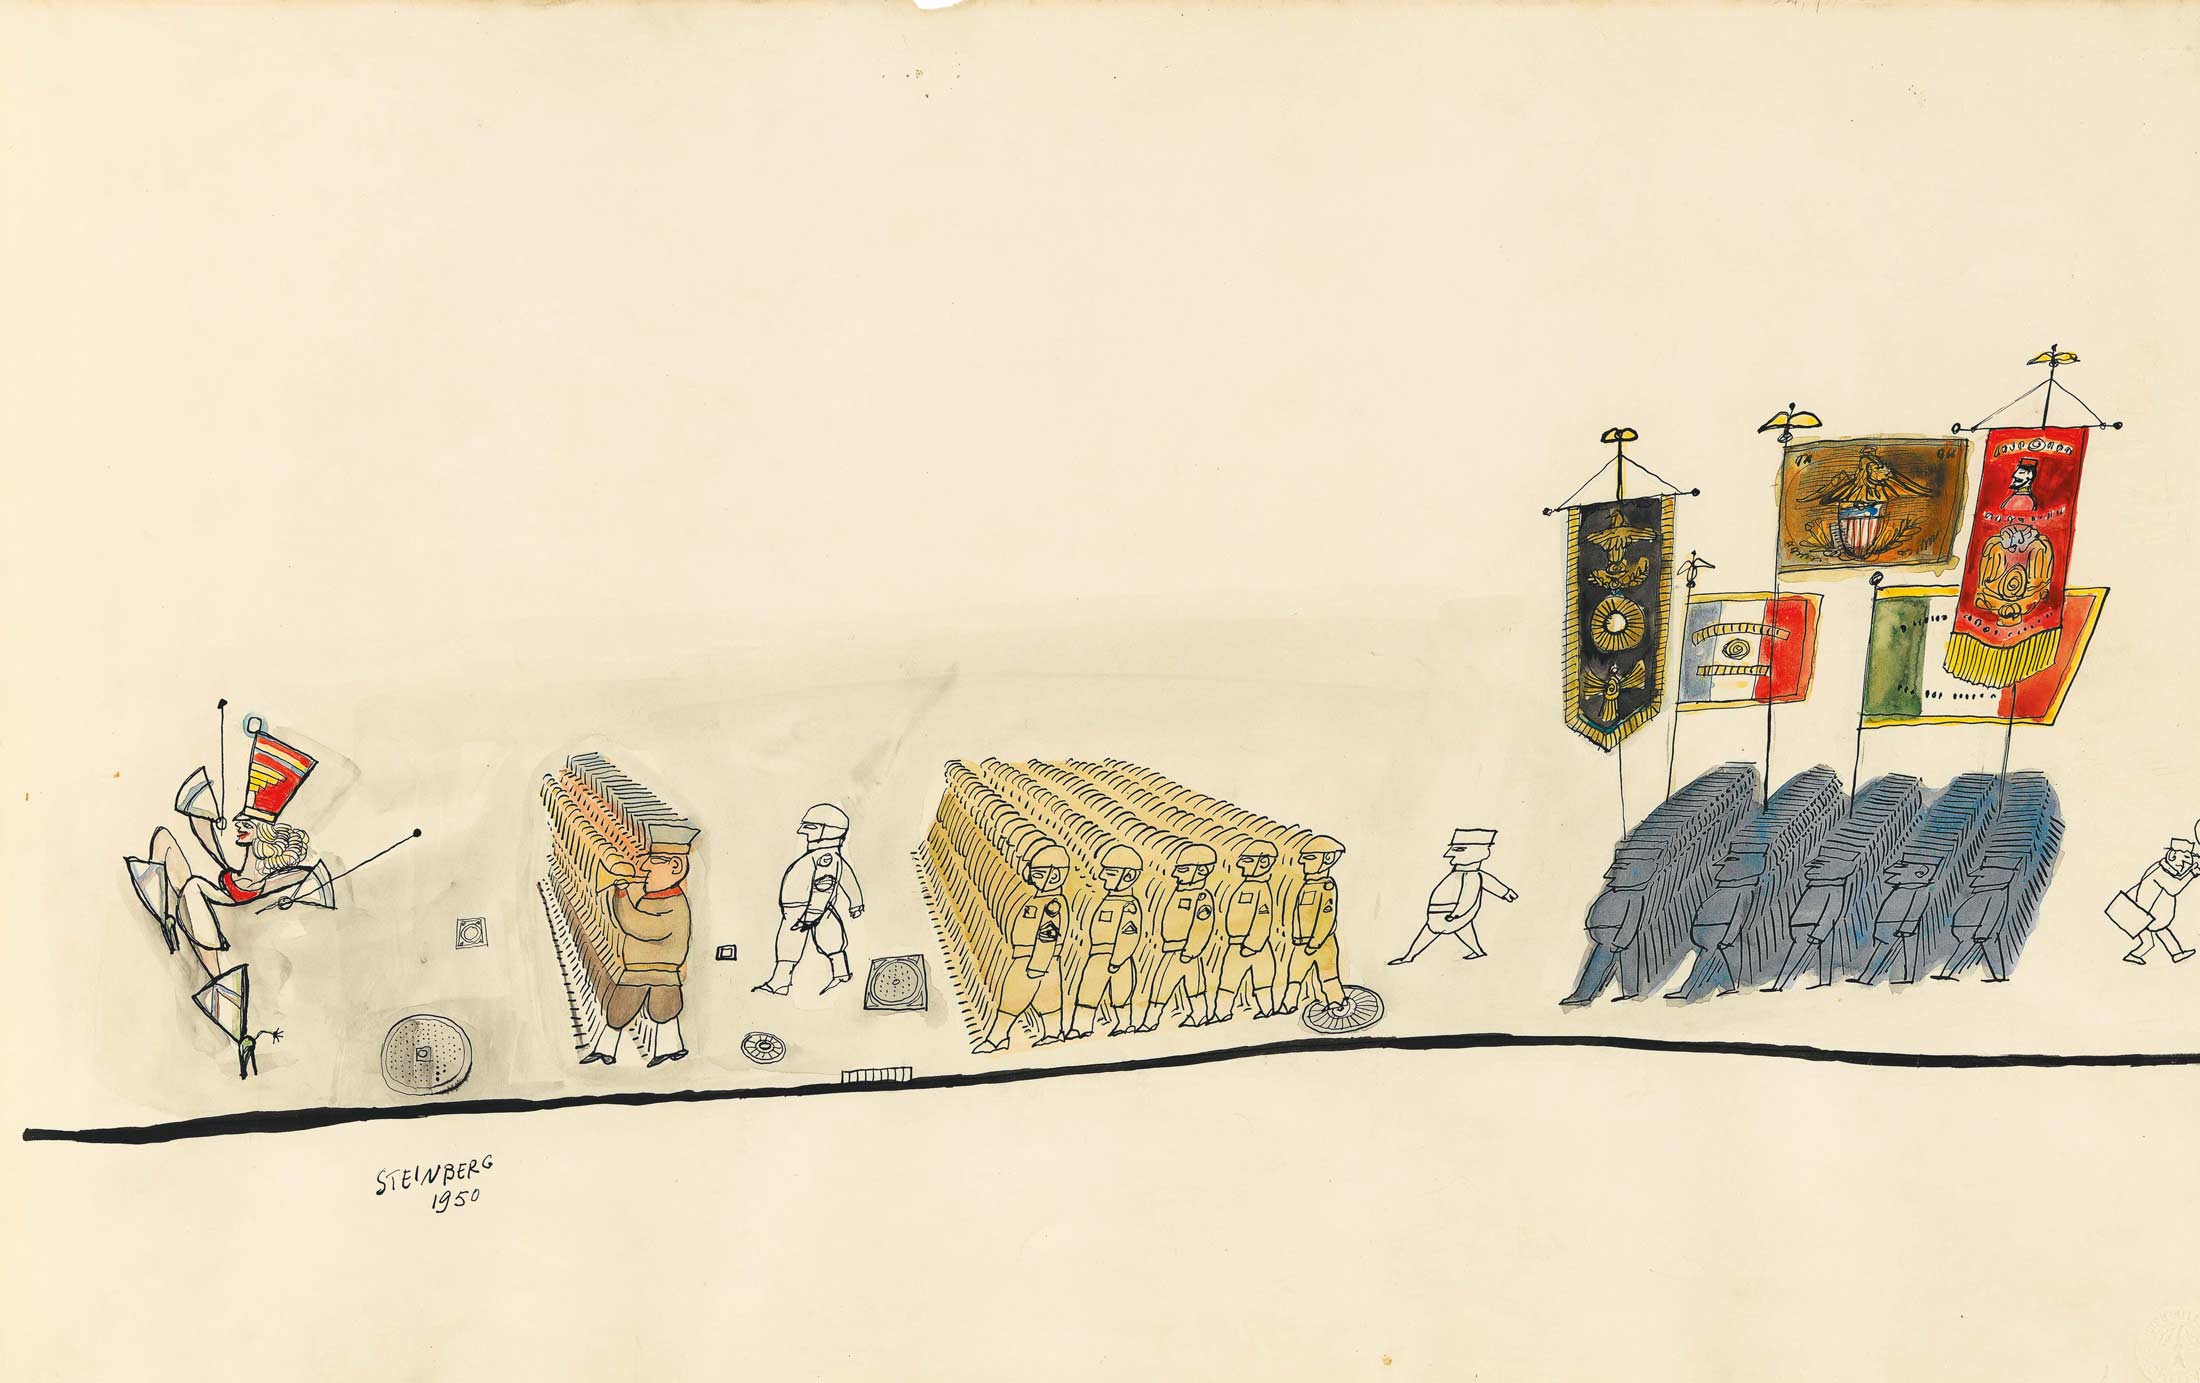 Panel 1 of <em>Parade</em>, 1951. Ink, crayon, and gold paper on paper, 14 9/16 x 23 1/16 in. The Metropolitan Museum of Art, New York; Purchase, Elihu Root, Jr. Gift and Rogers Fund.